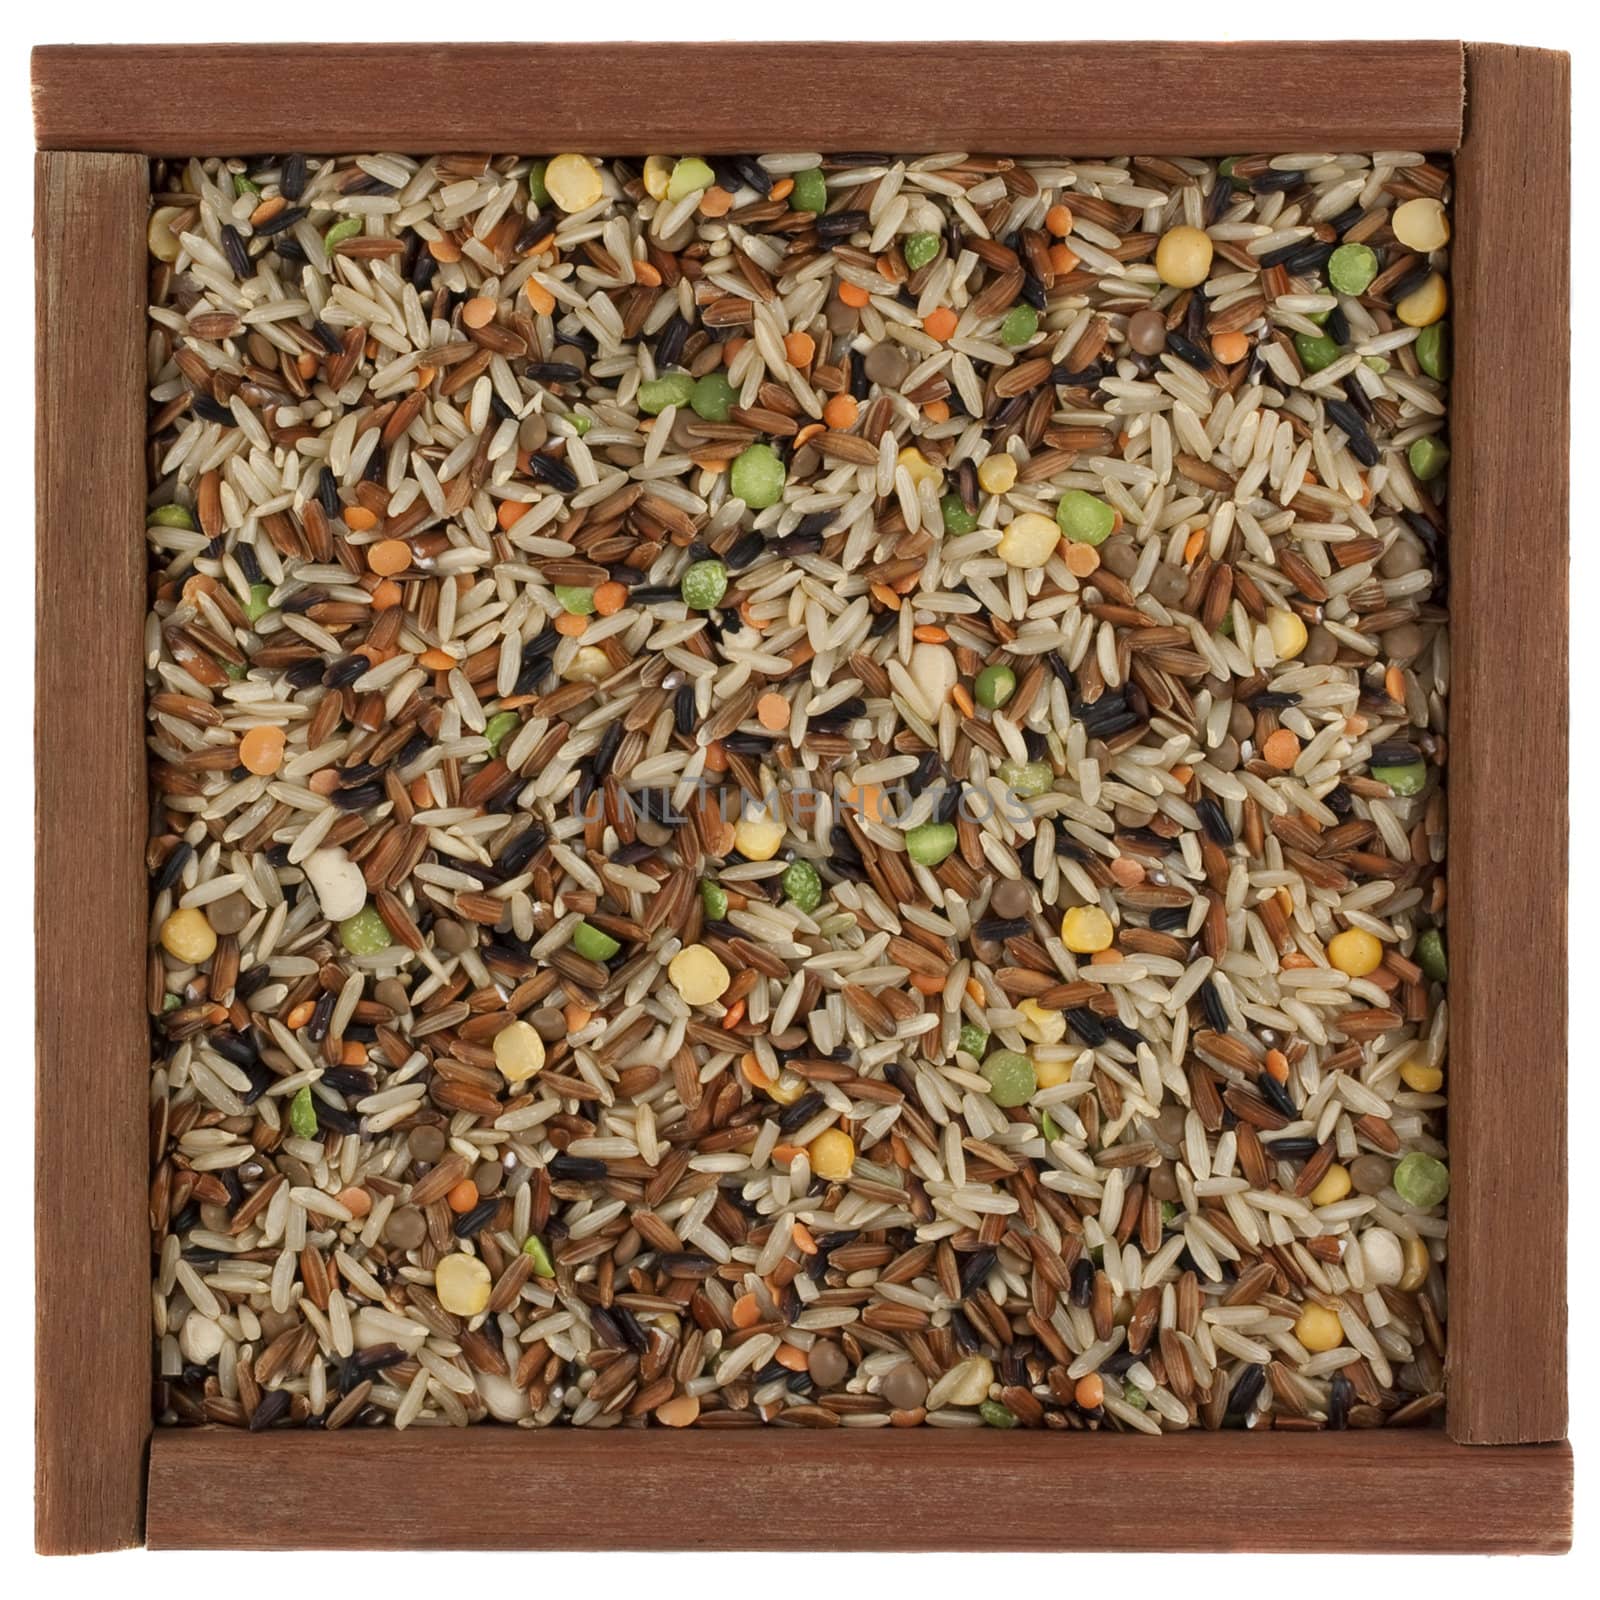 pilaf mix with brown and black, Japanica rice, black eye, split green, yellow pea, lentils in a rustic, wooden box isolated on white